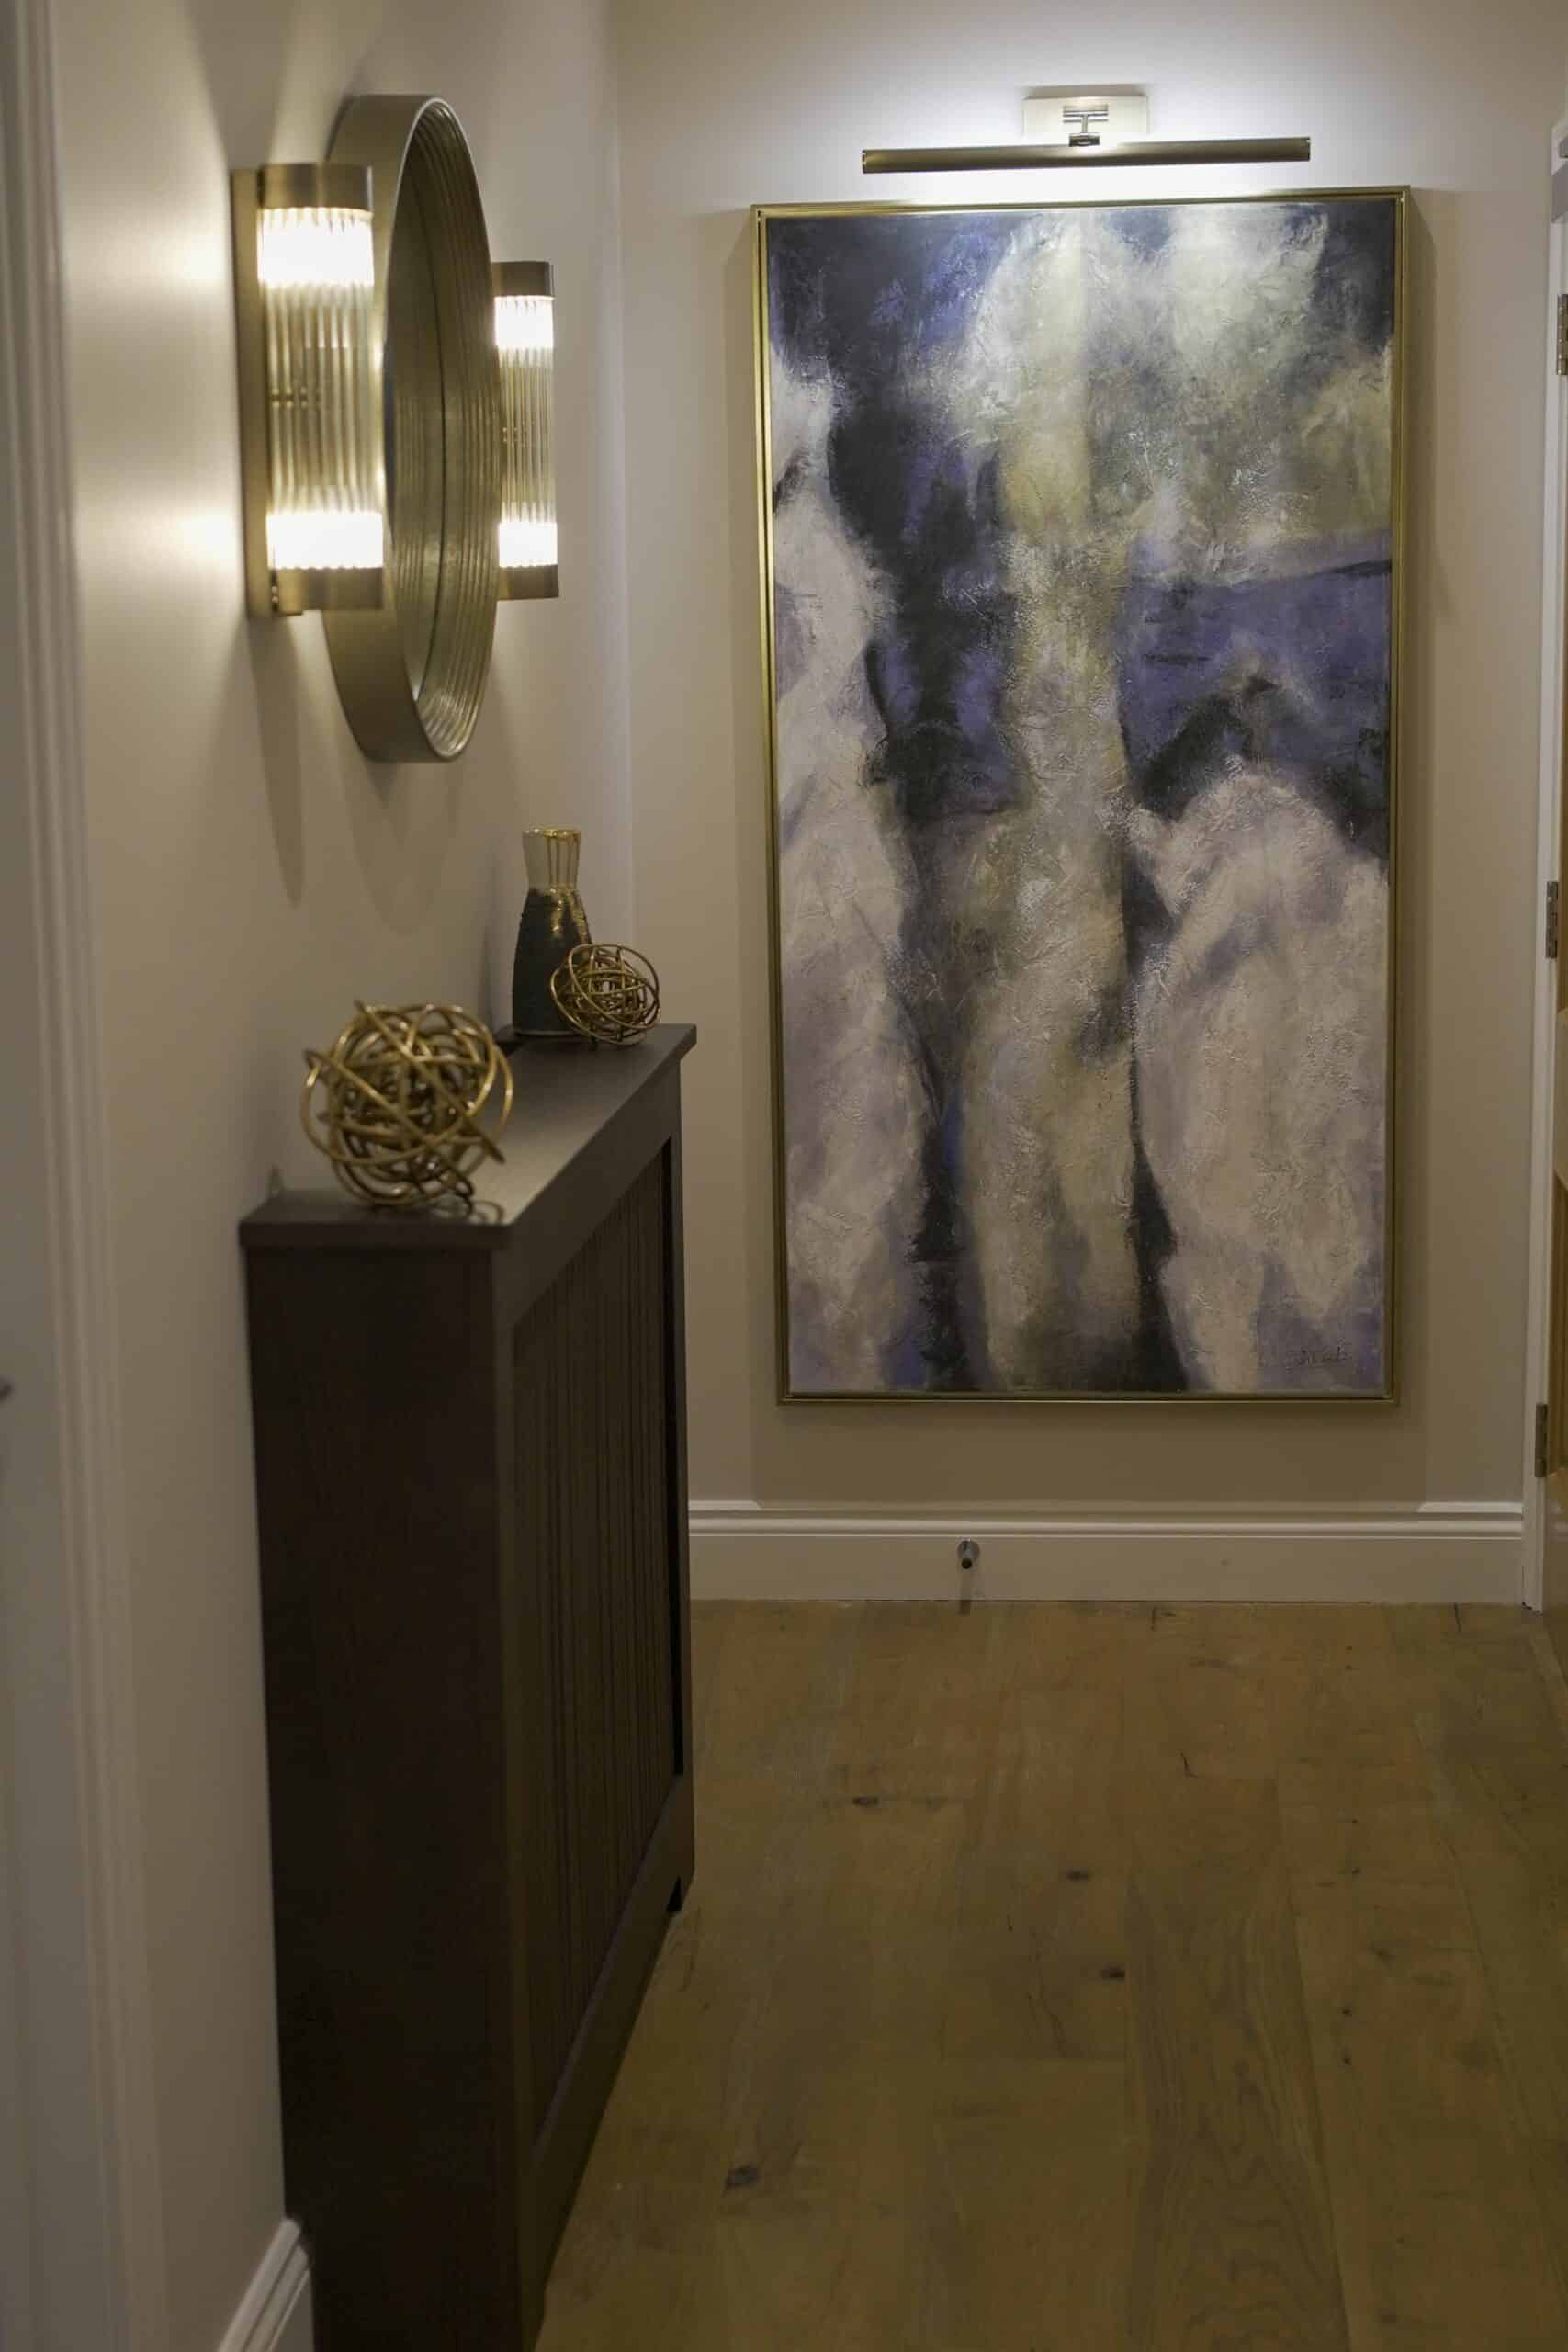 Neutral-coloured hallway with bespoke radiator cover, rounded mirror, tubular wall lights and modern art on the walls